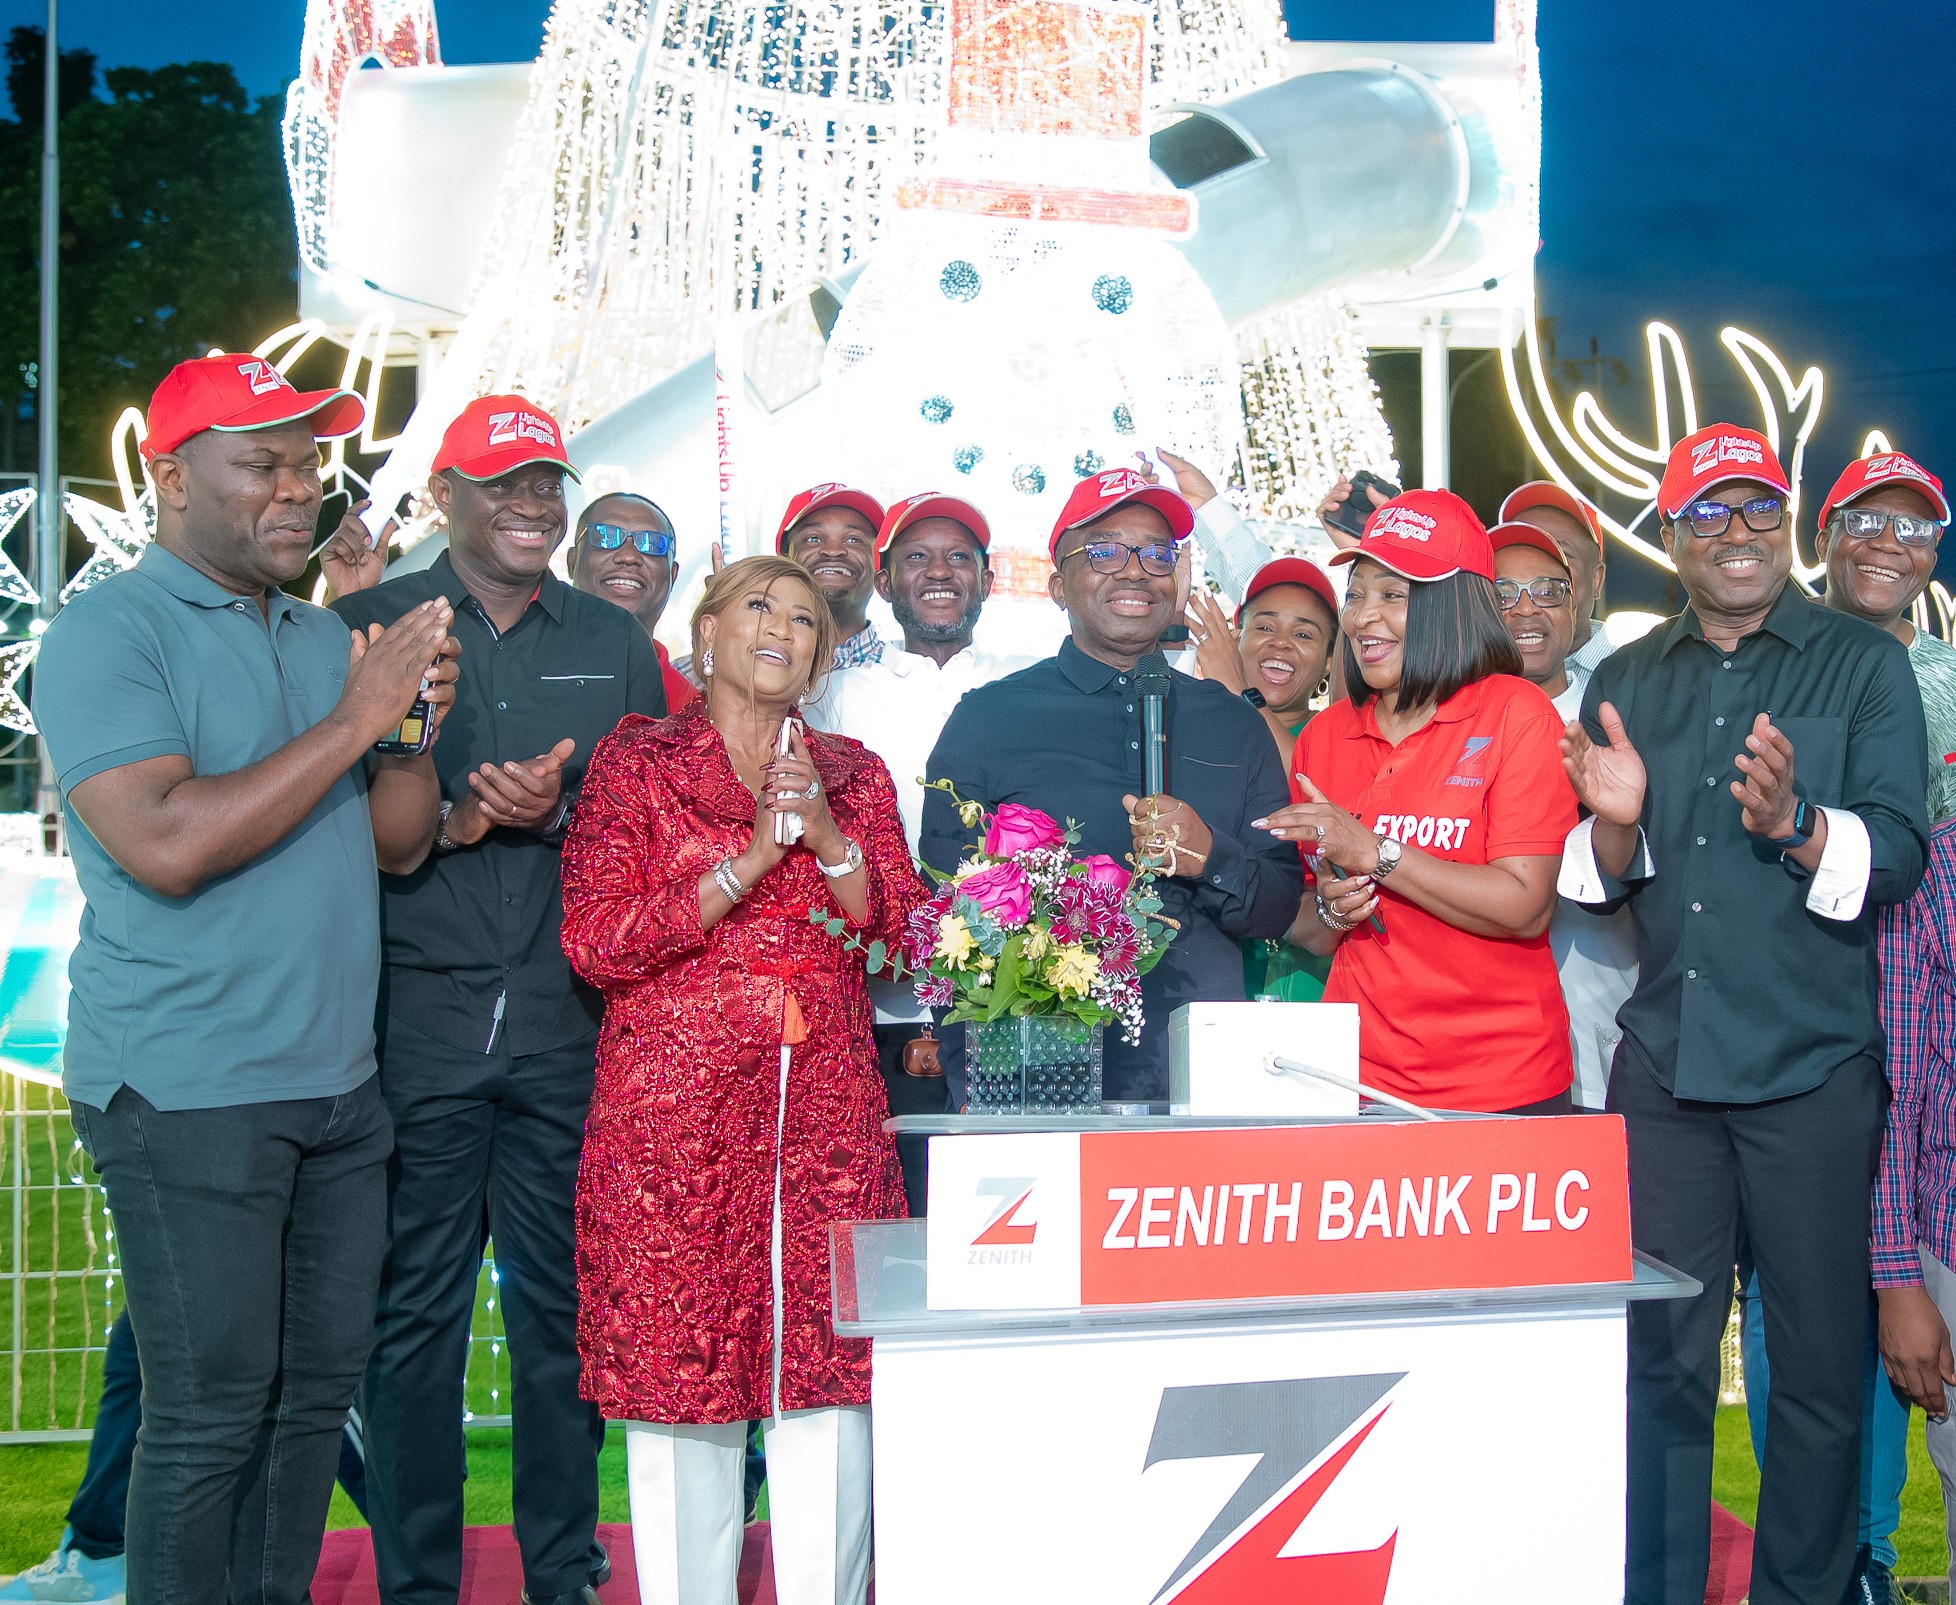 ZENITH BANK ACTIVATES THE SPIRIT OF CHRISTMAS WITH AJOSE ADEOGUN STREET LIGHT-UP